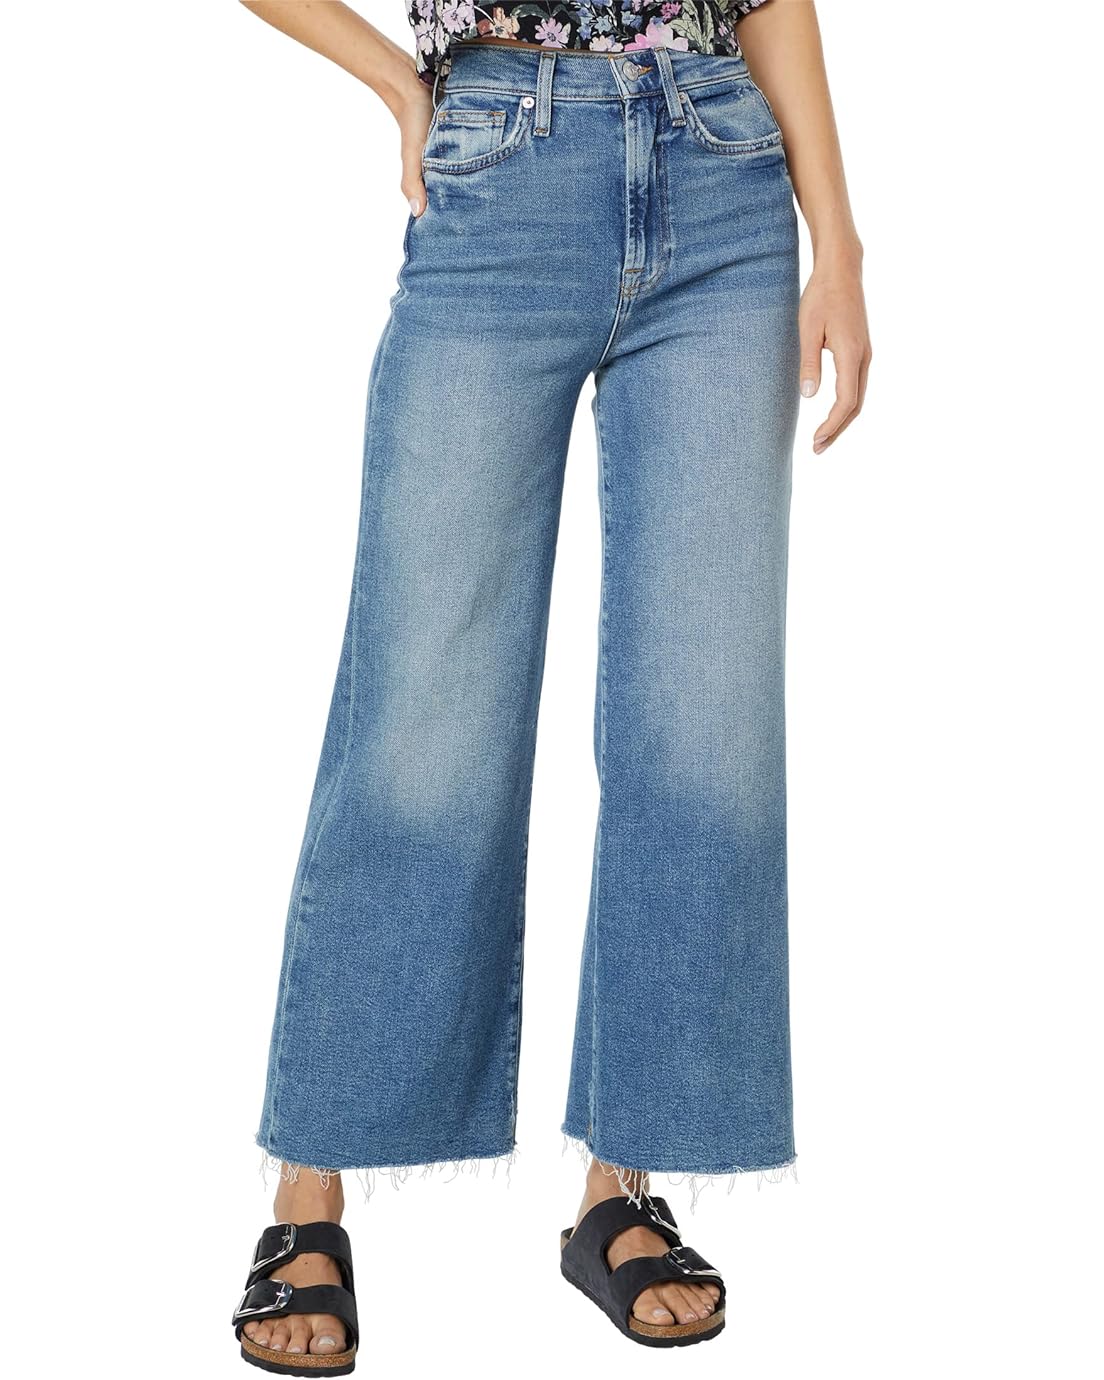 7 For All Mankind Ultra High-Rise Crop Jo with Cut Hem in Luxe Vintage Iris Blue